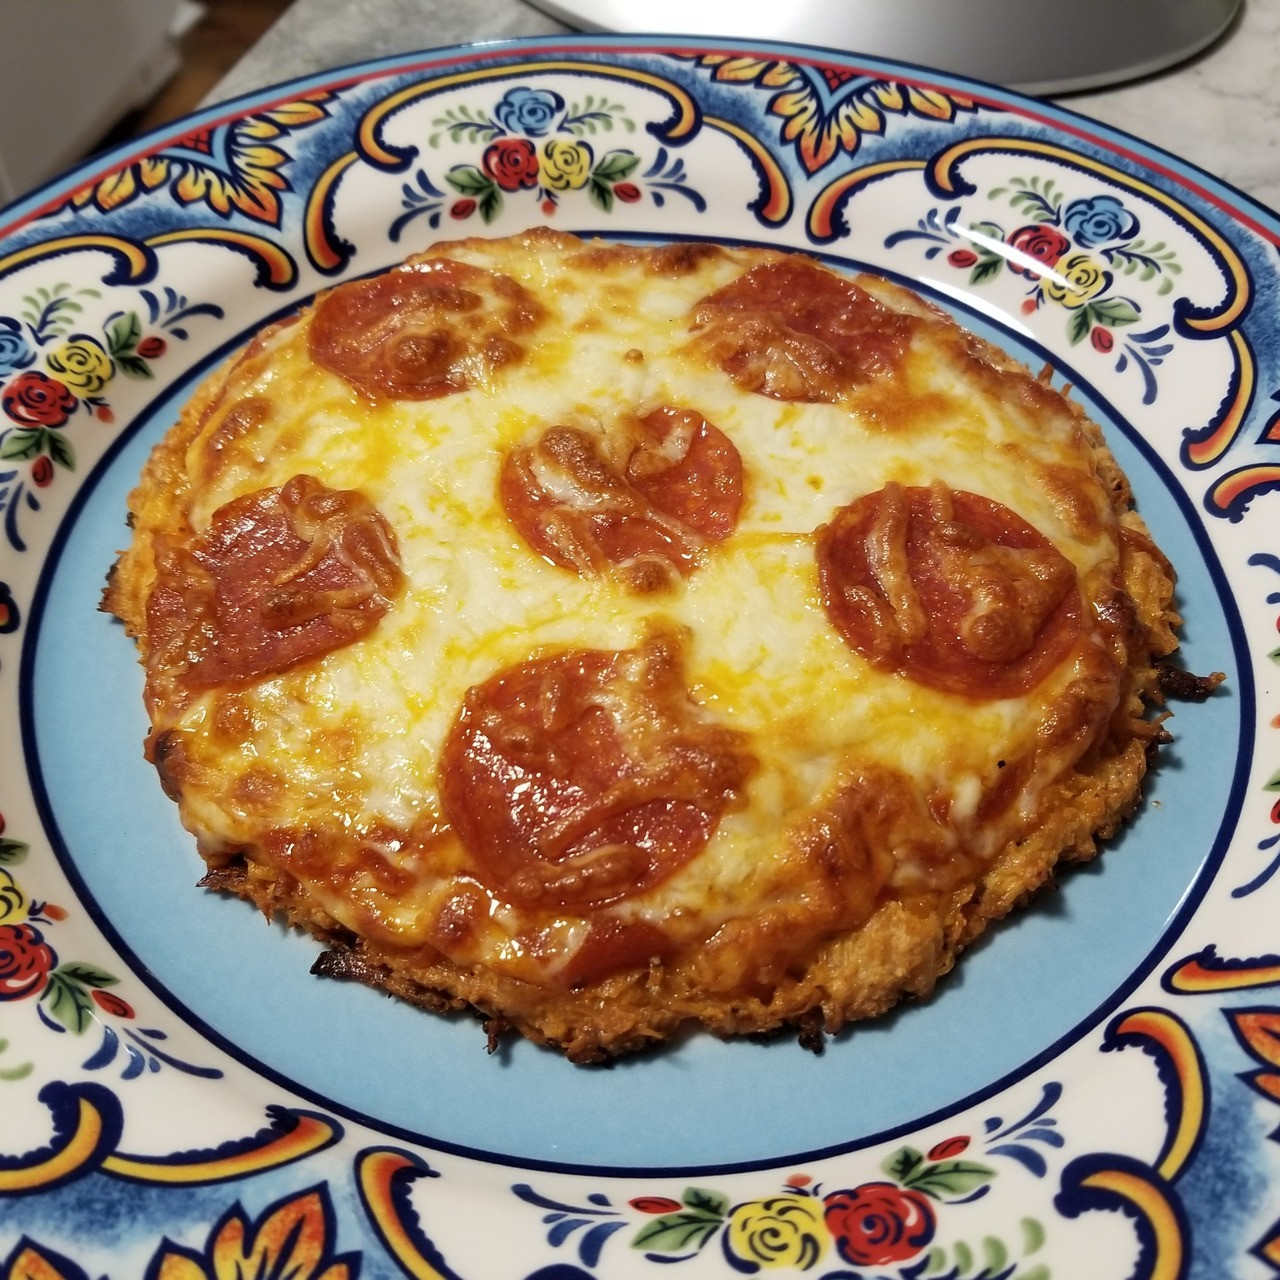 Canned Chicken Keto
 Keto Time — Made a chicken crust pizza with canned chicken